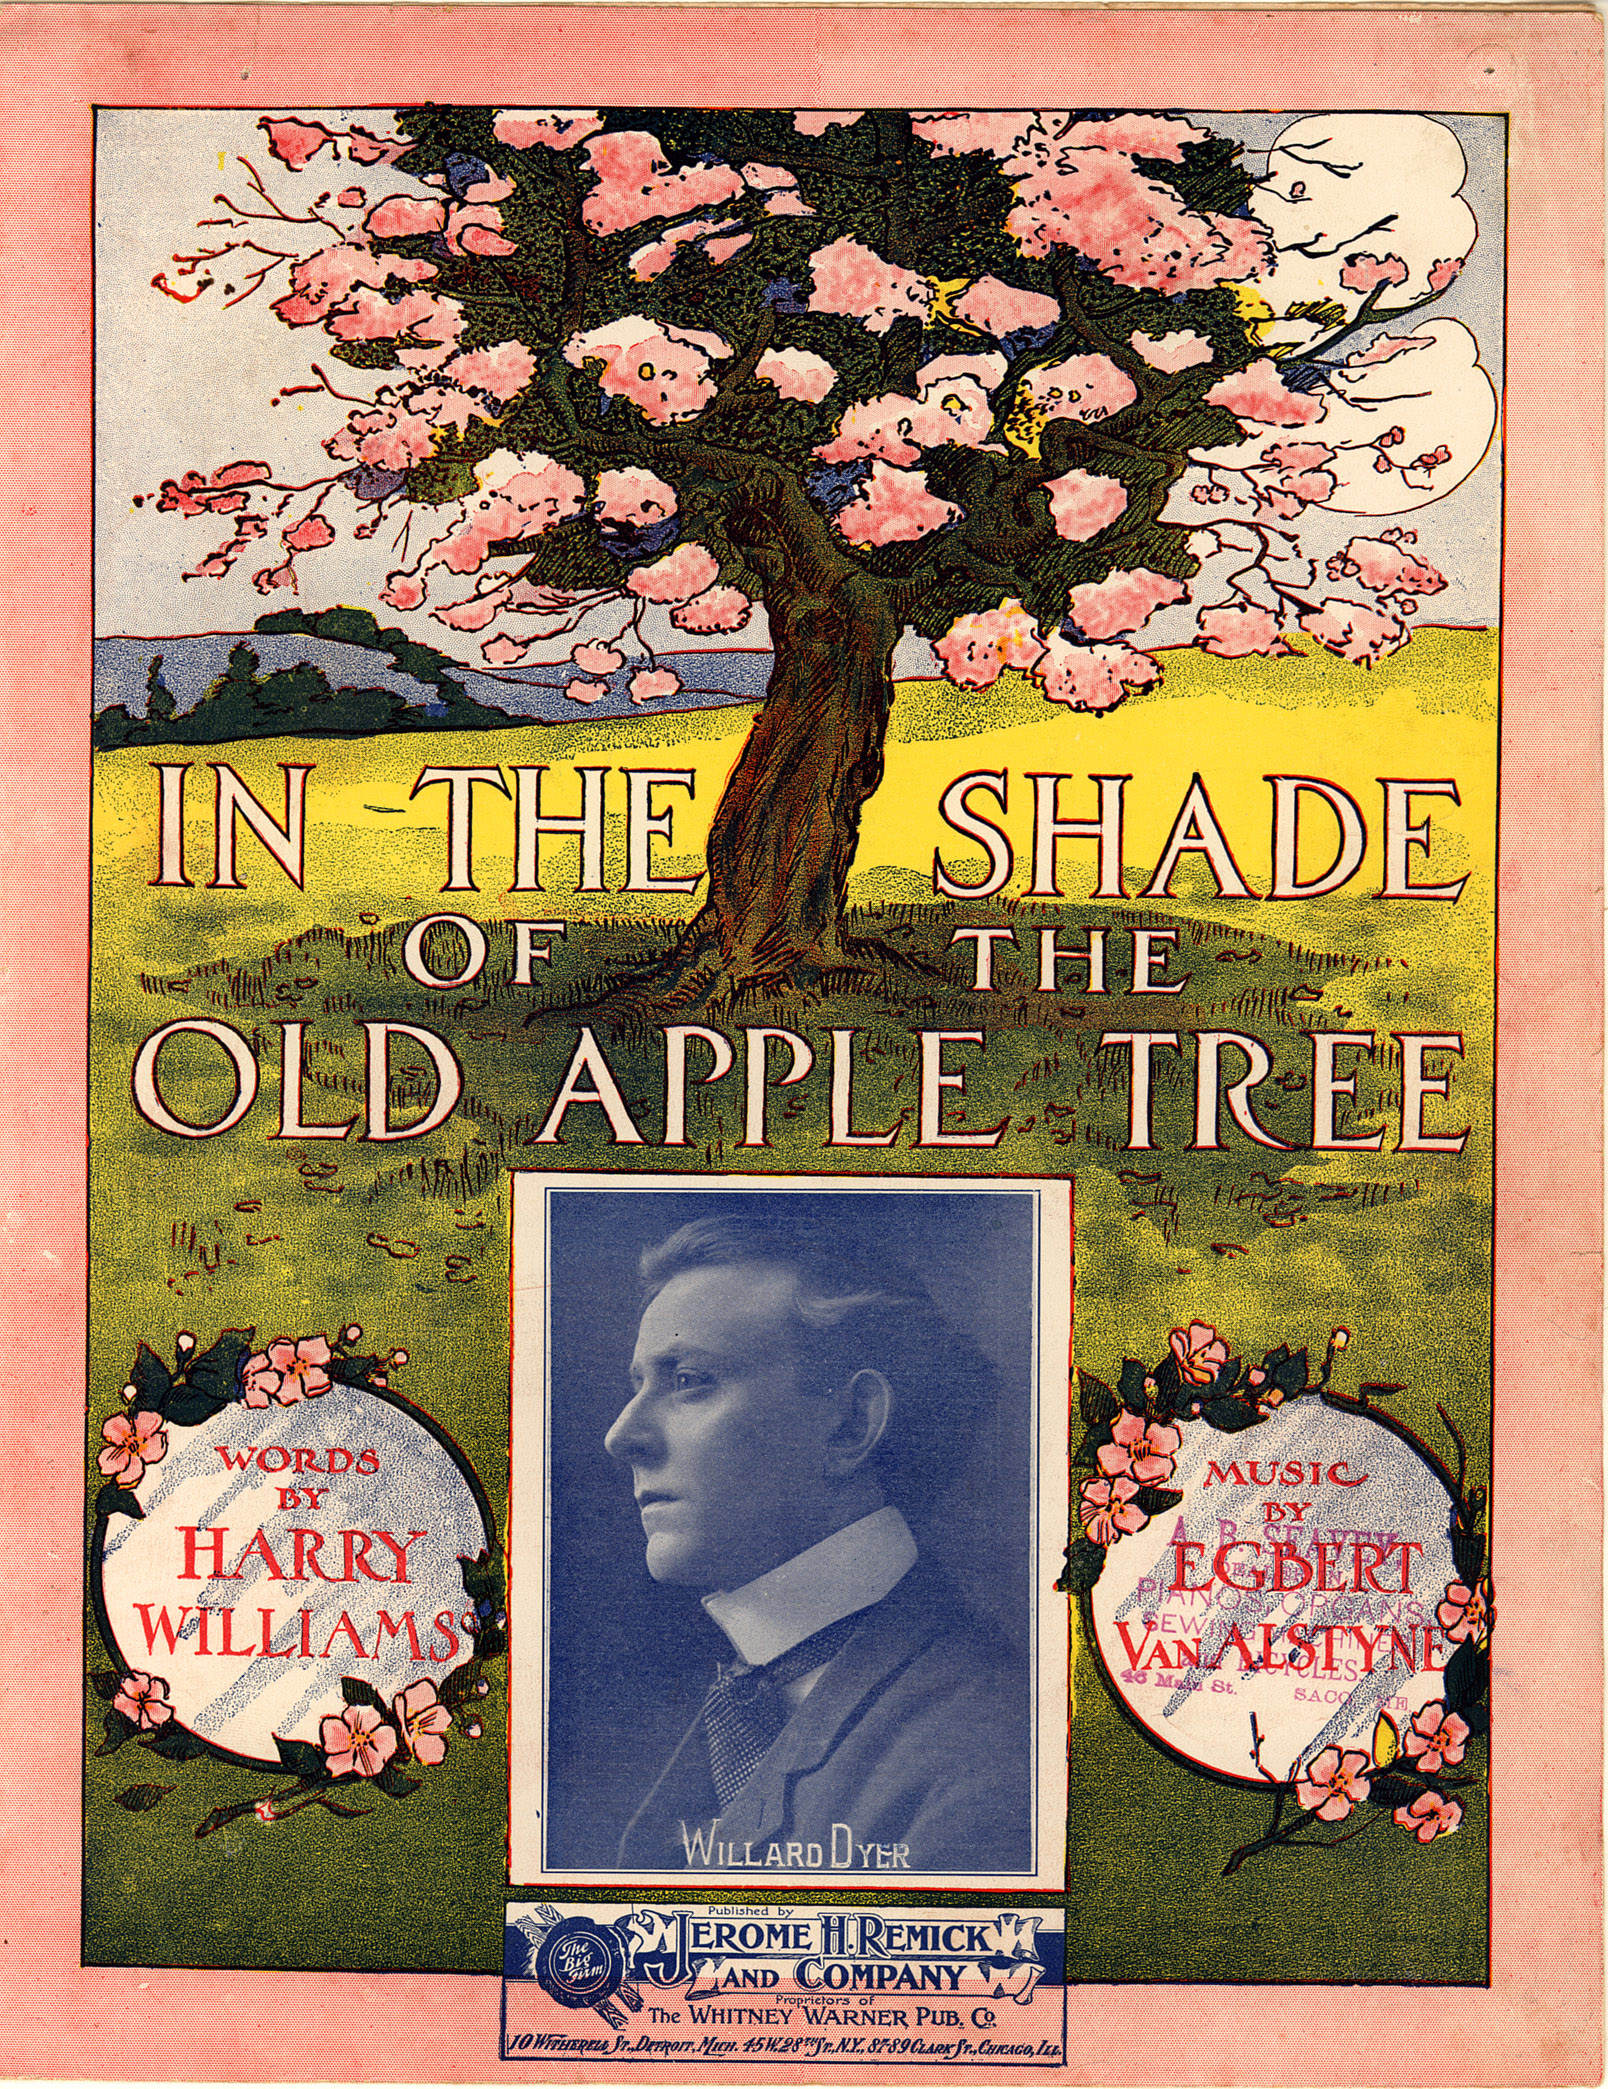 In the Shade of the Old Apple Tree is a popular song dating from 1905. It was written by Harry Williams, music by Egbert Van Alstyne.